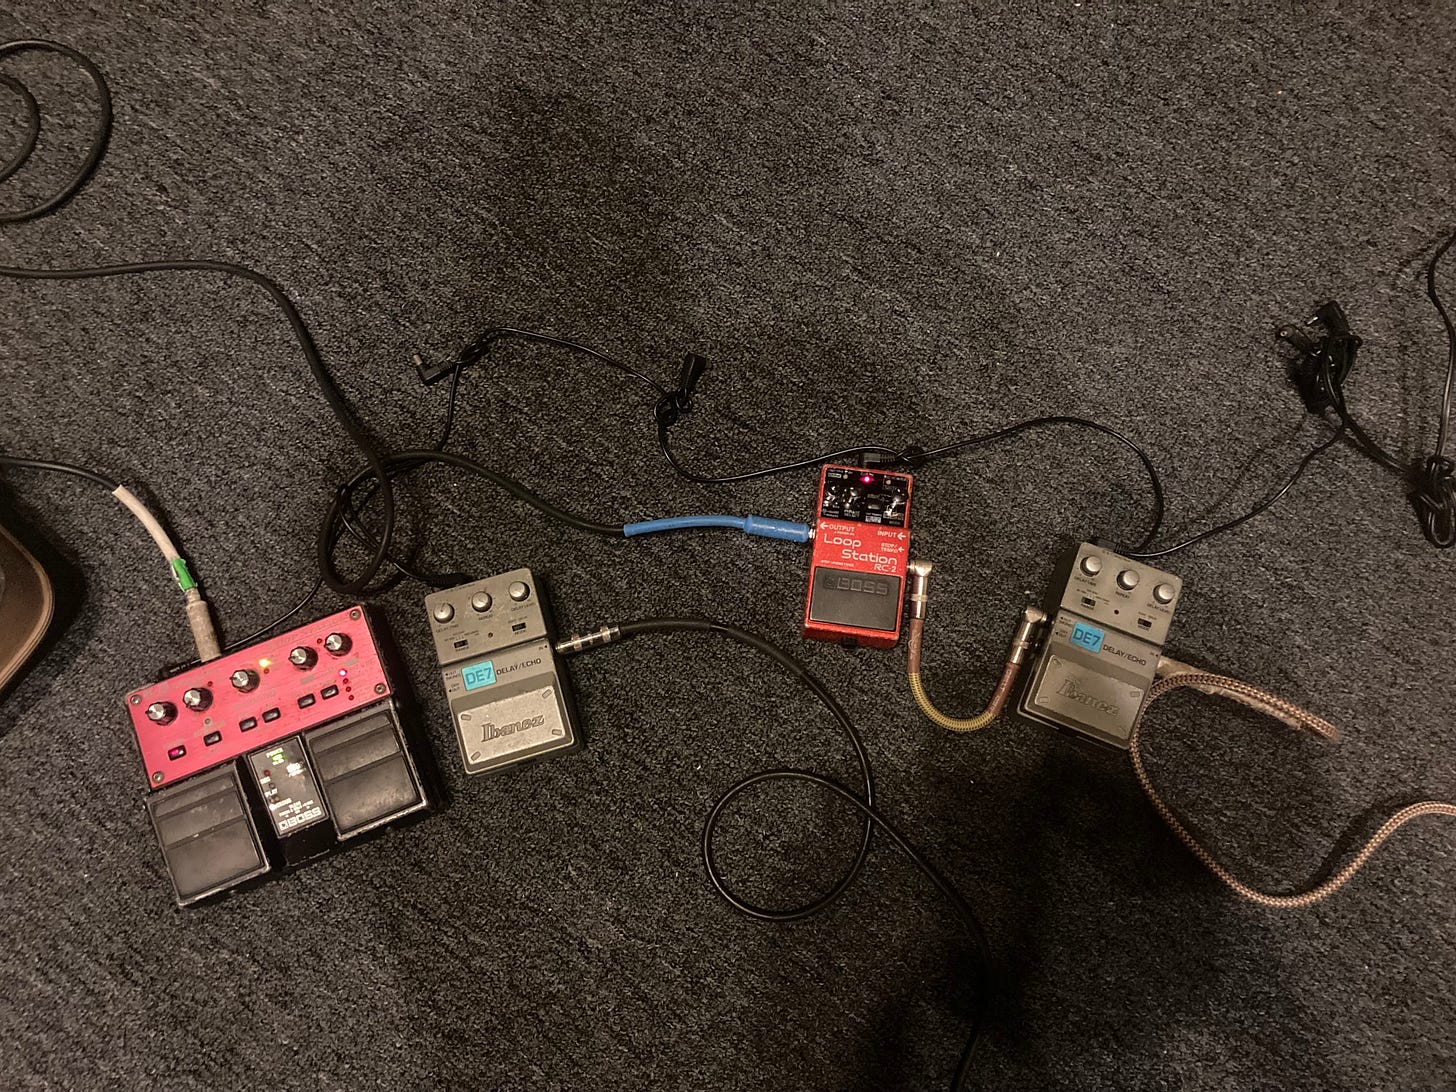 4 guitar pedals. 2 loop stations and two delay pedals, played out on carpet.